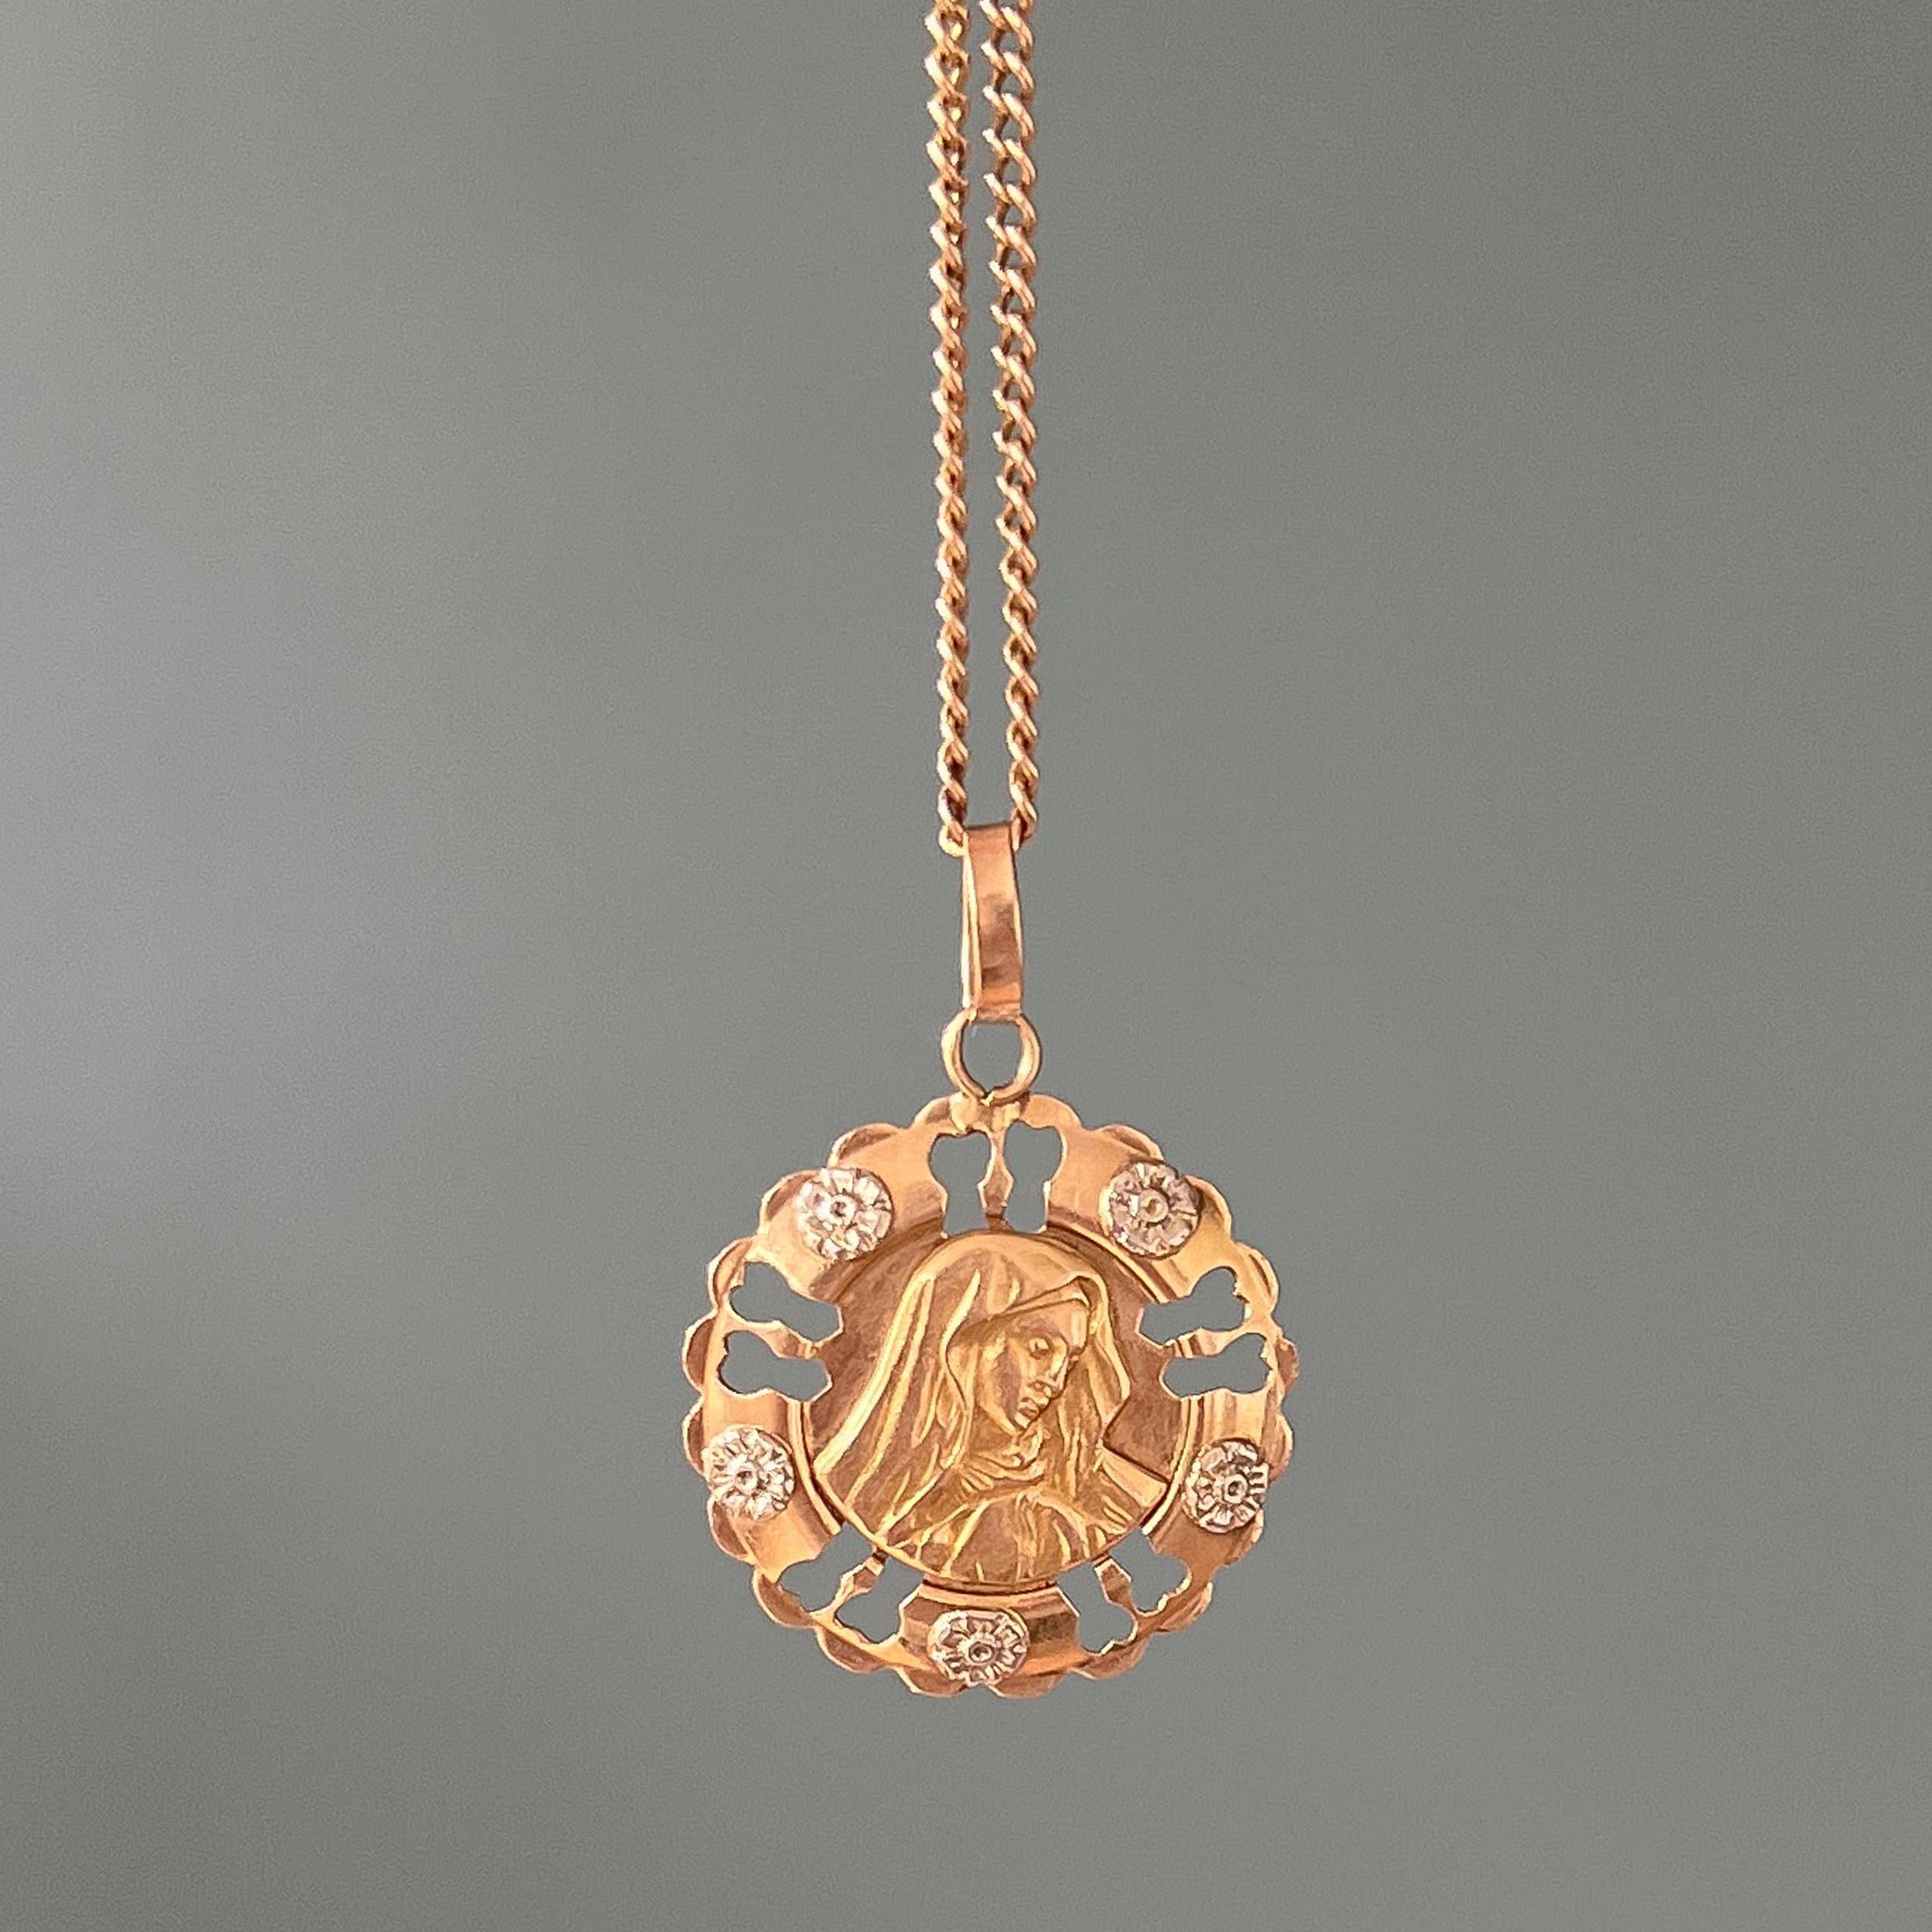 A vintage Italian 18 karat gold and silver Virgin Mary pendant. This pendant is beautifully created with an openwork border set with floral decor of five silver flowers and in its center Virgin Mary is depicted in high relief. 

Charms and pendants